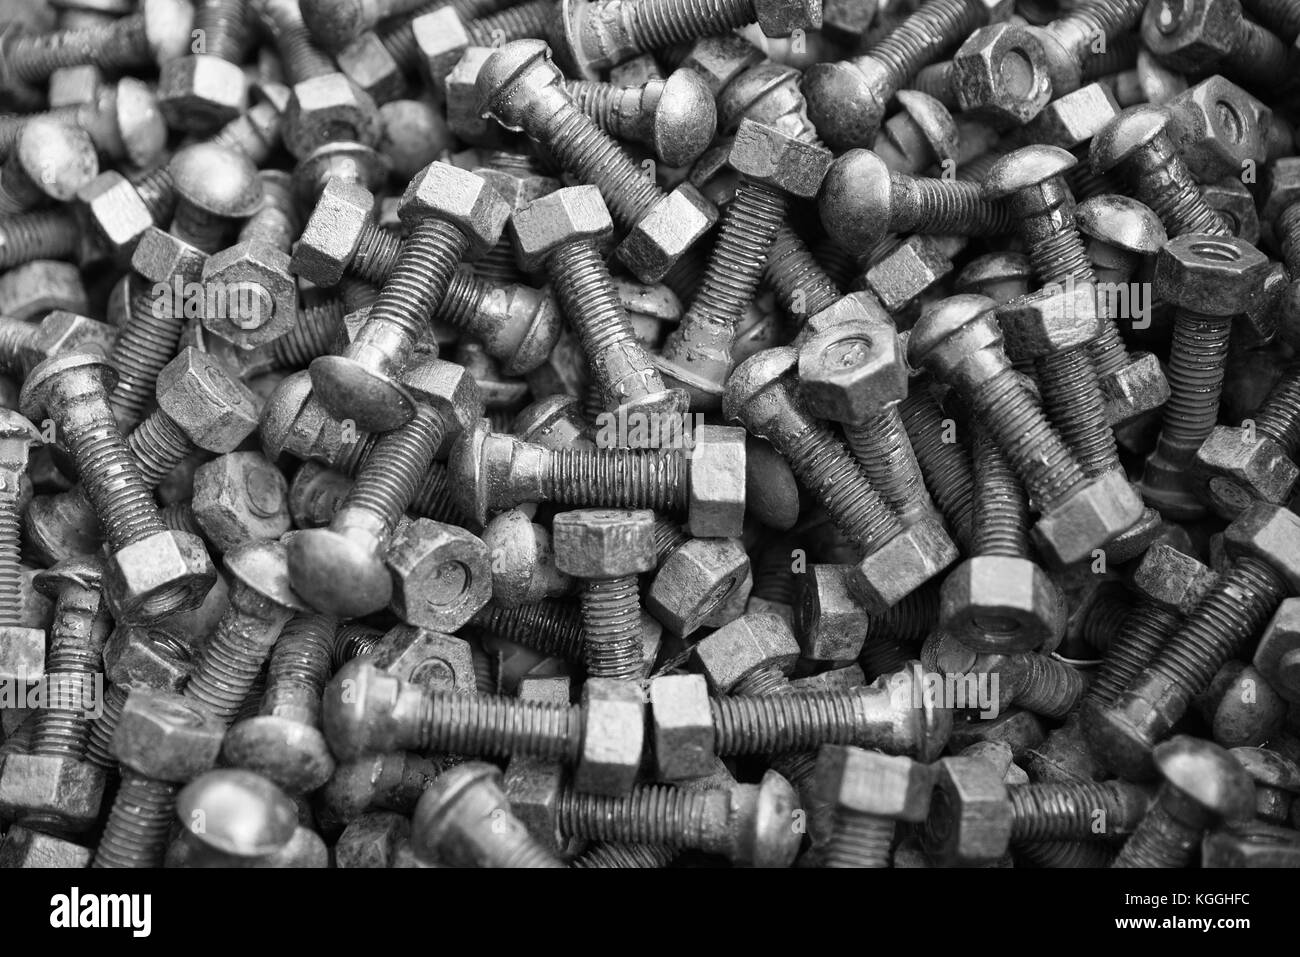 Rusty nuts and bolts Stock Photo